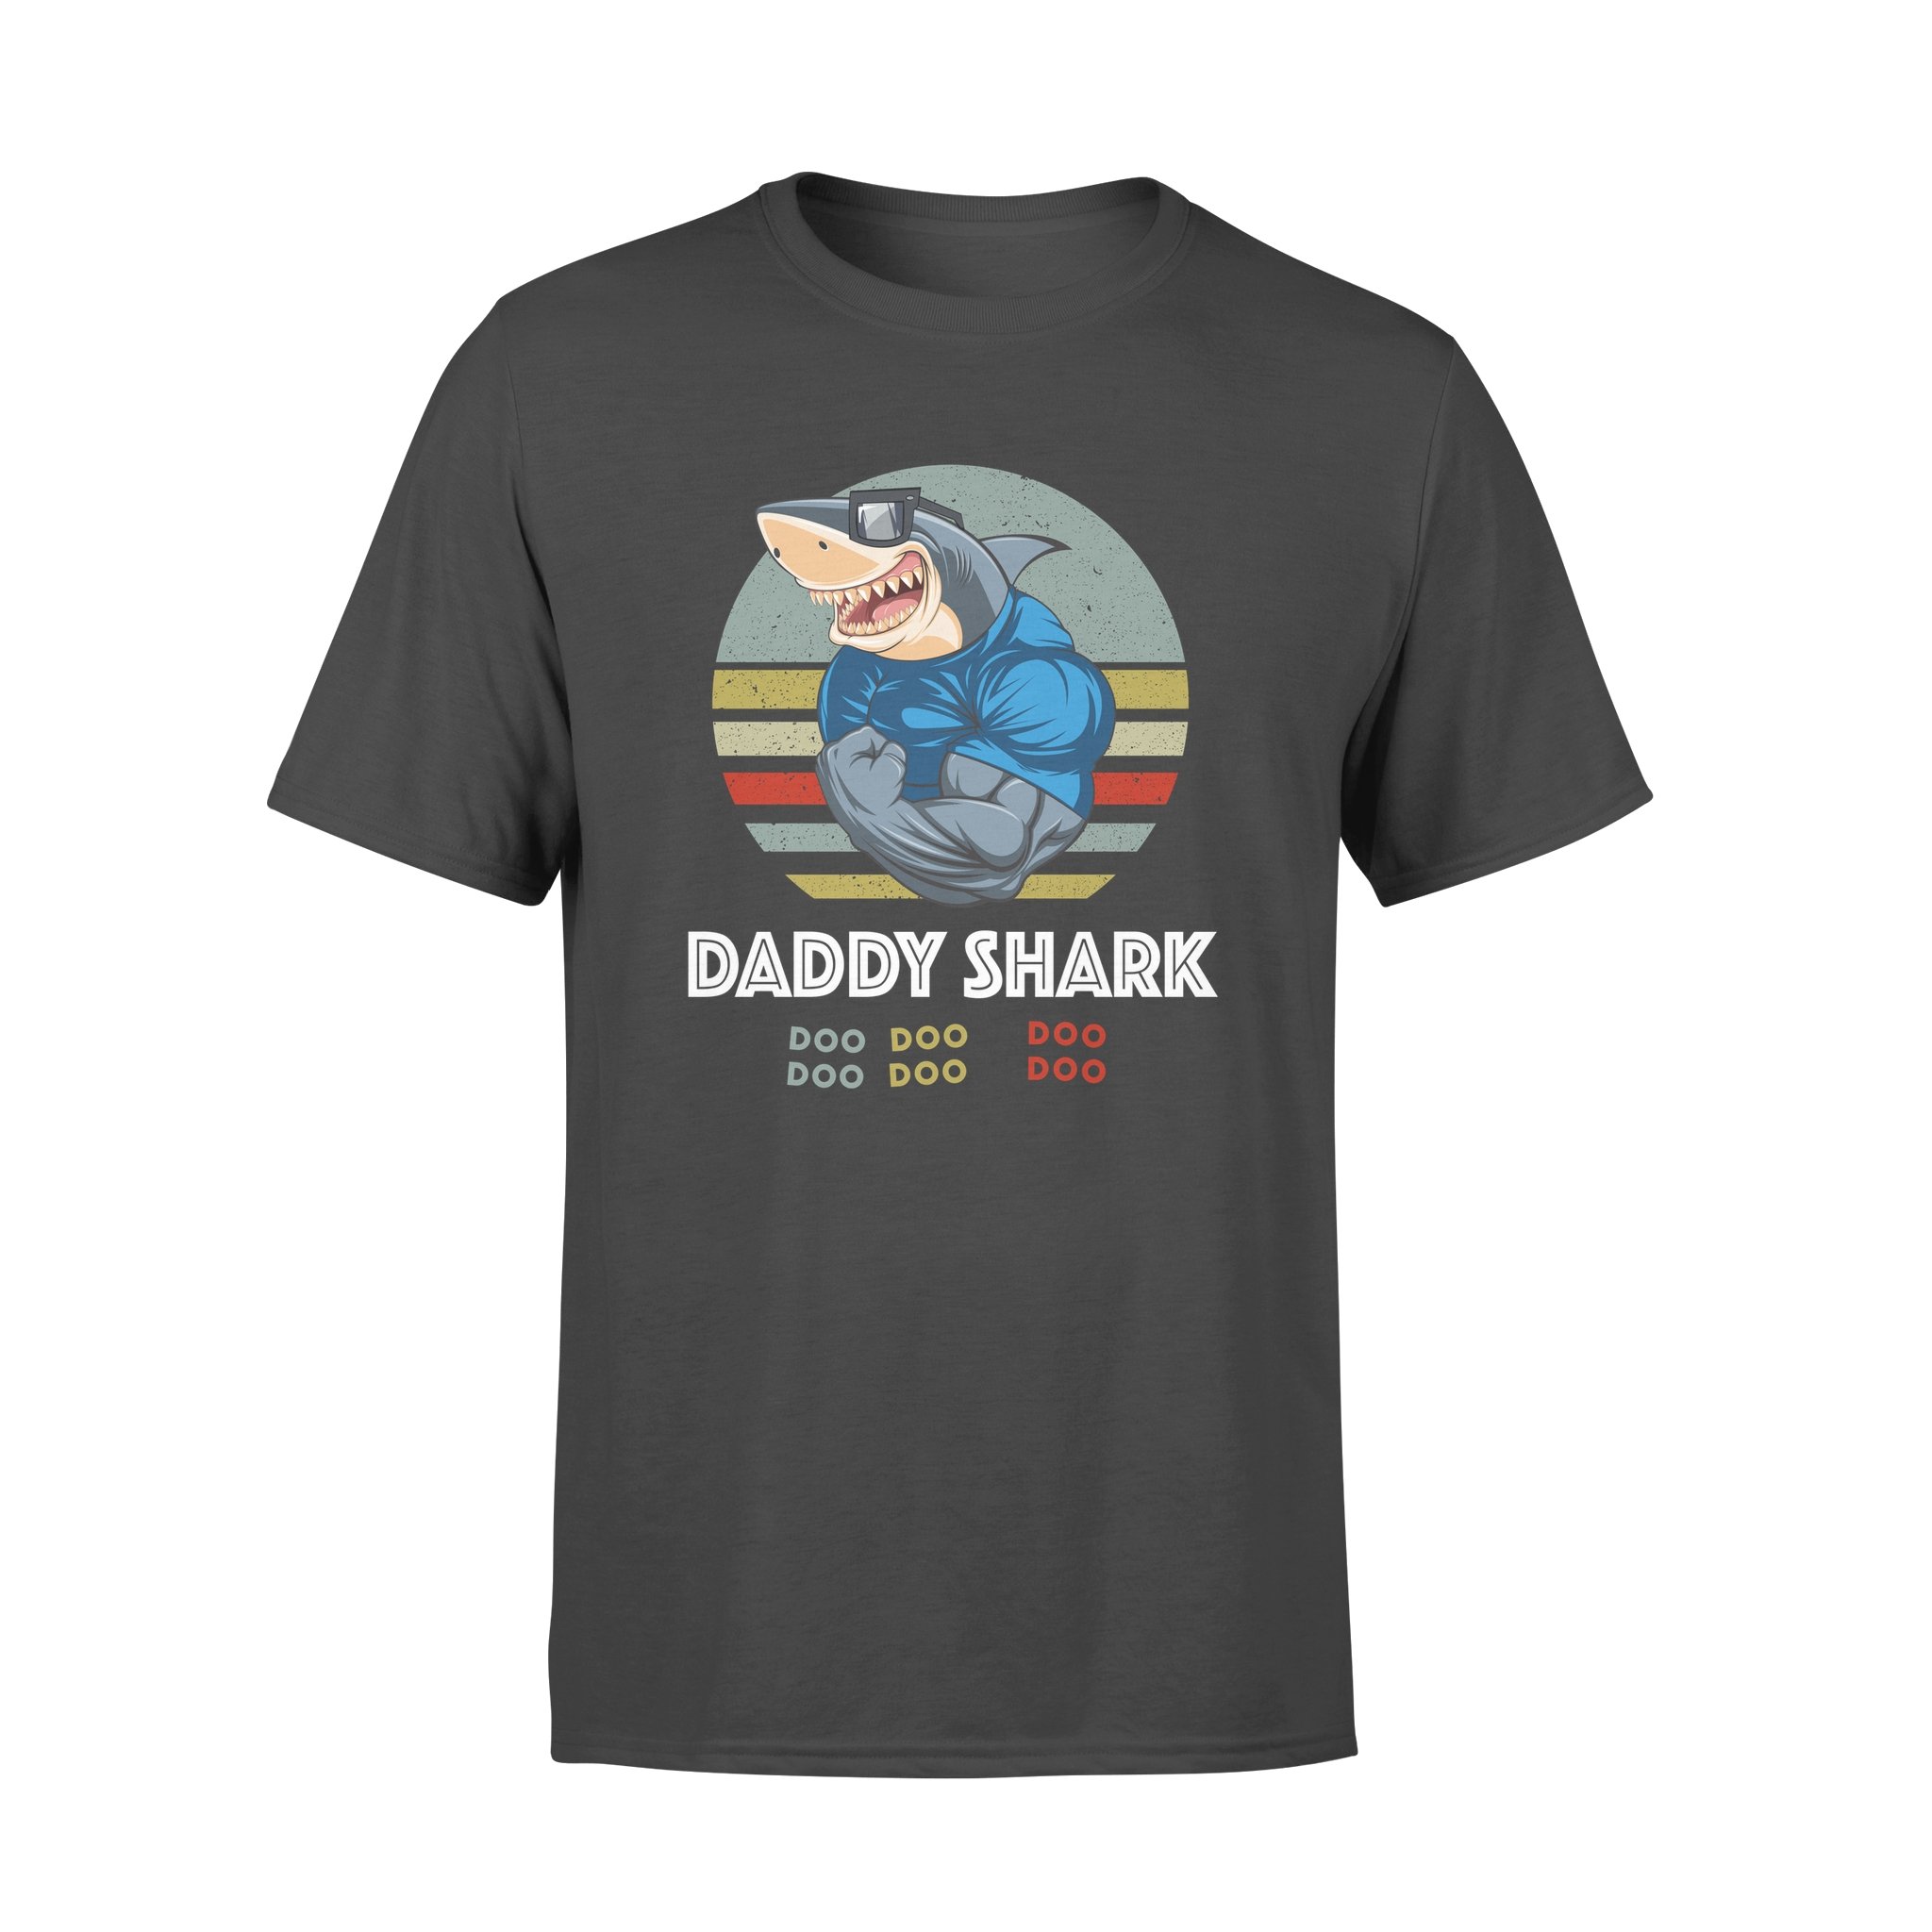 DADDY SHARK,DAD SHIRT,GIFTS FOR DAD,DAD GIFTS,FATHER?S DAY GIFT,GIFT FOR MEN SHIRT,PLUS SIZE SHIRT